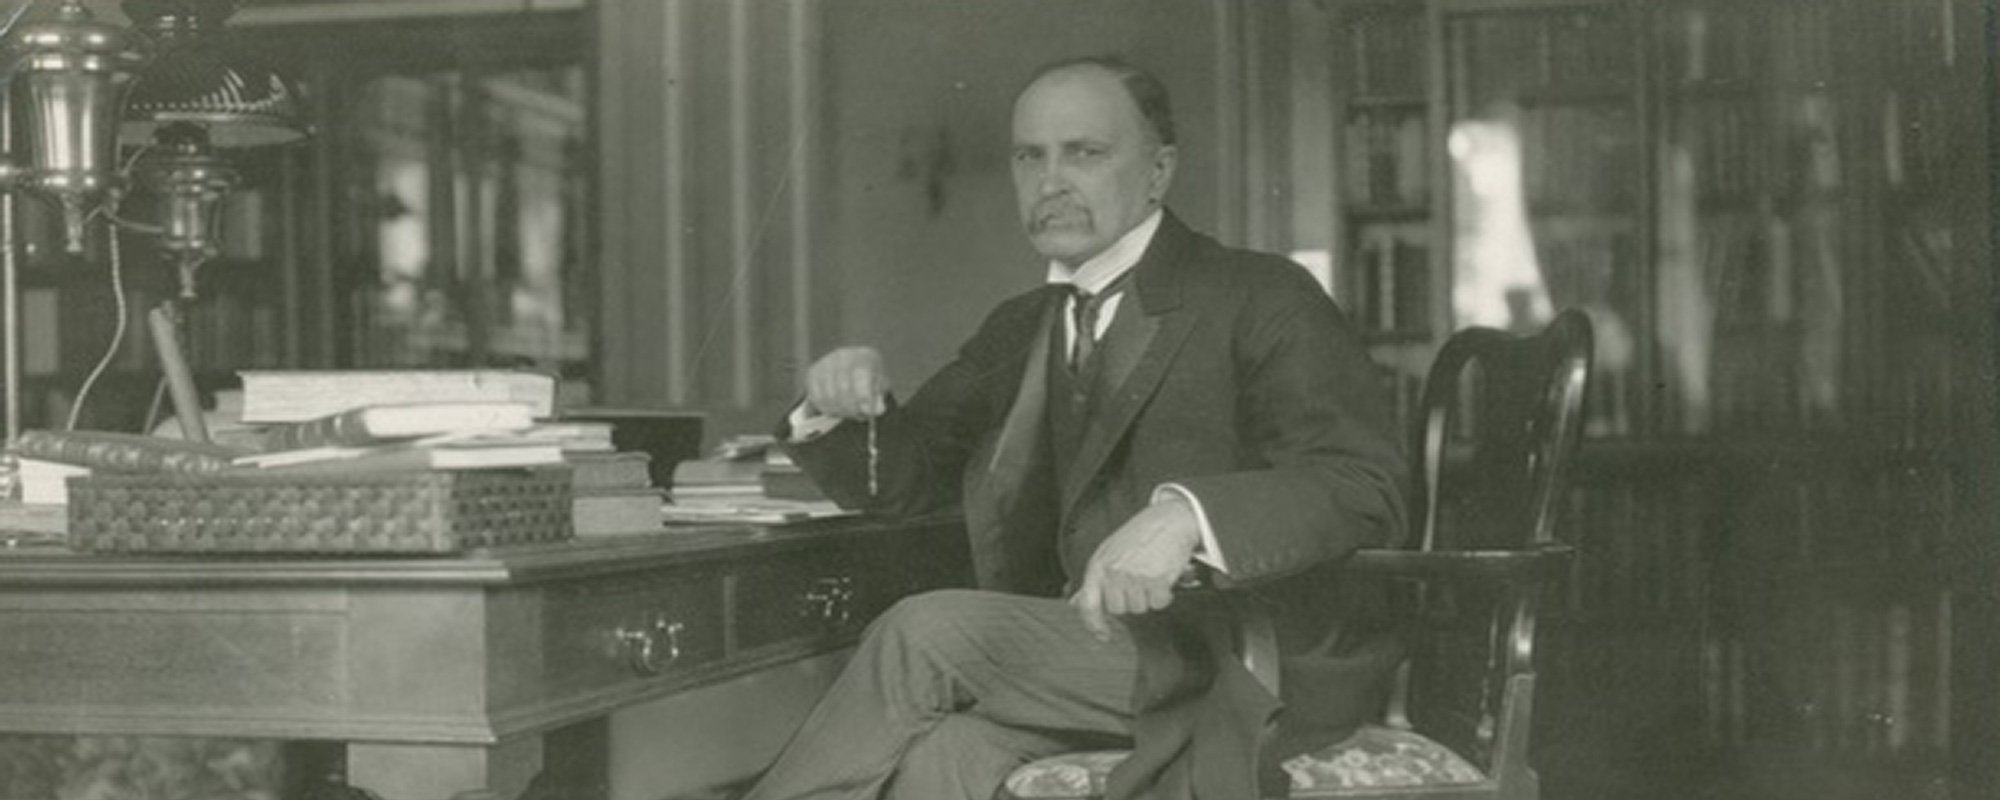 The American Osler Society is a history of medicine organization dedicated to perpetuating the life, teachings, and ethical example of Sir William Osler.